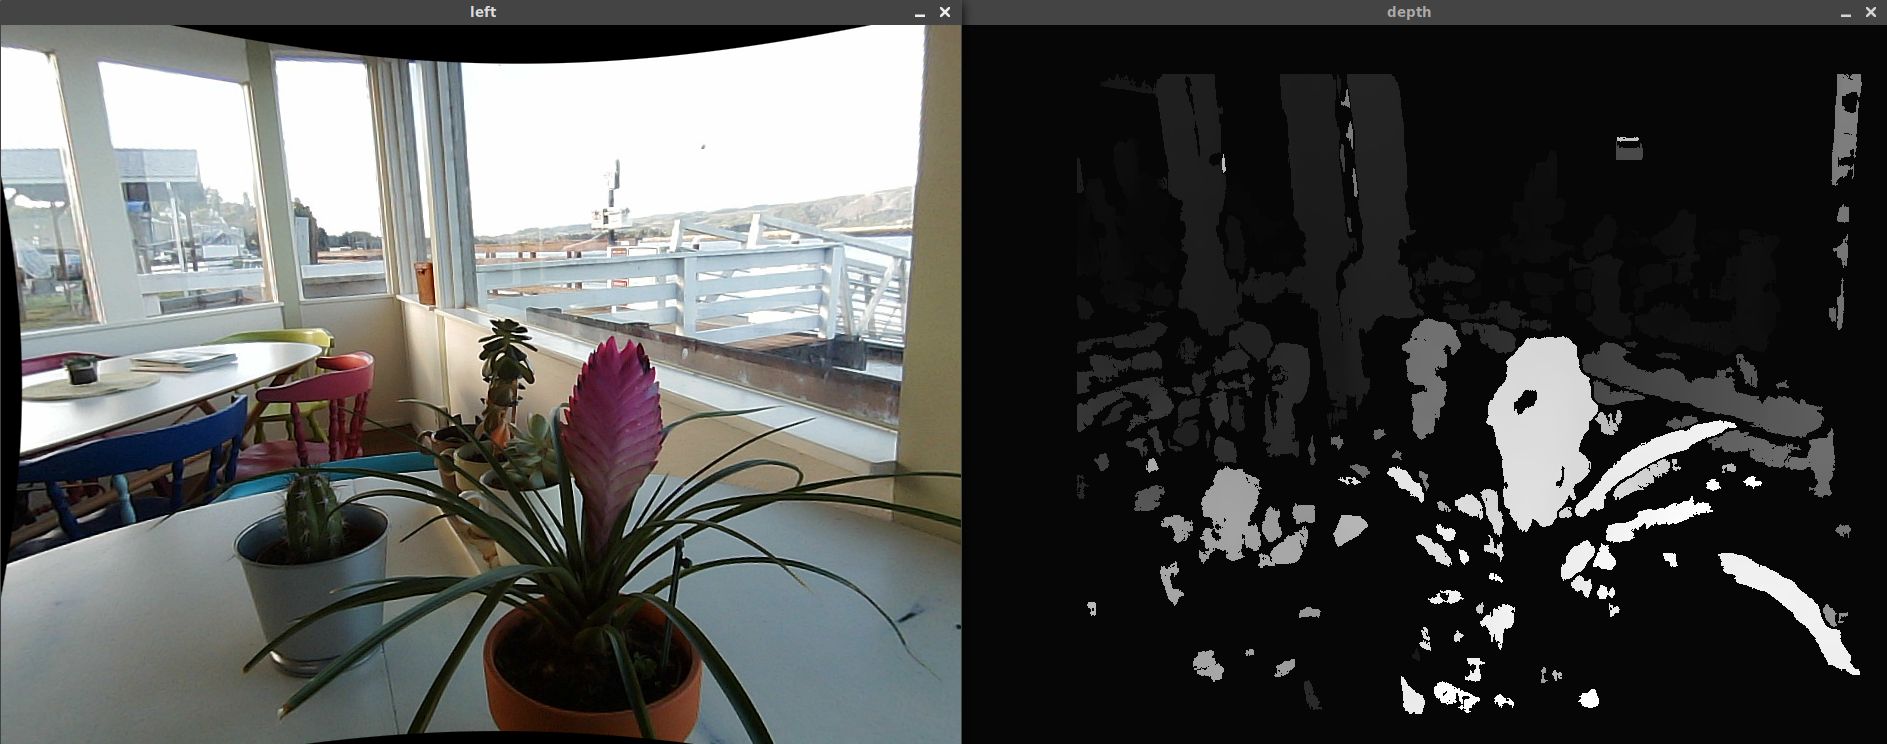 Potted plants and the corresponding depth map